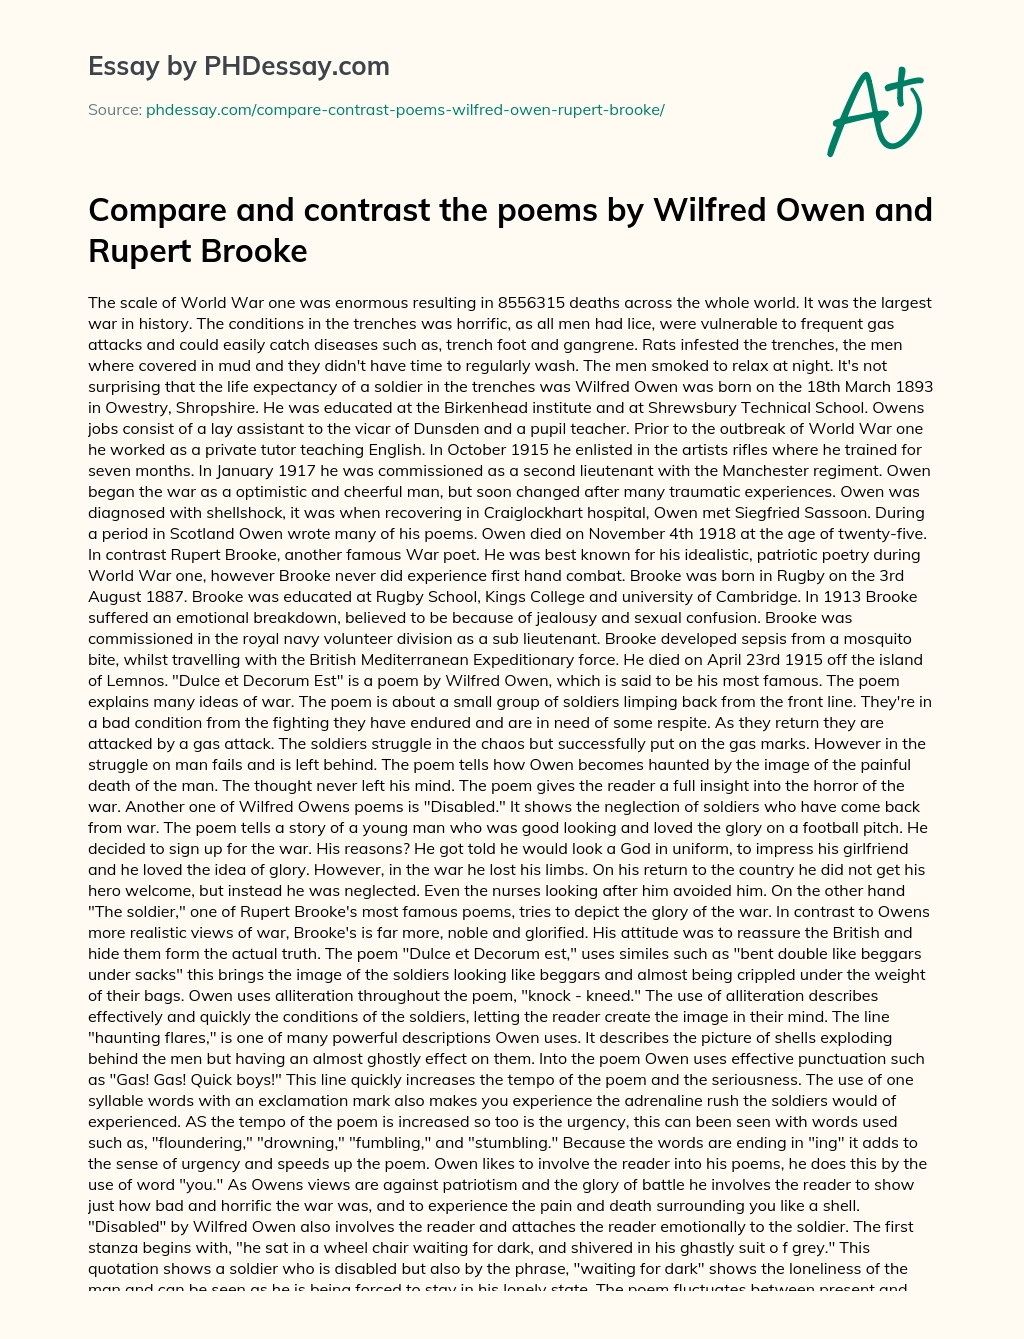 Poems by Wilfred Owen and Rupert Brooke essay